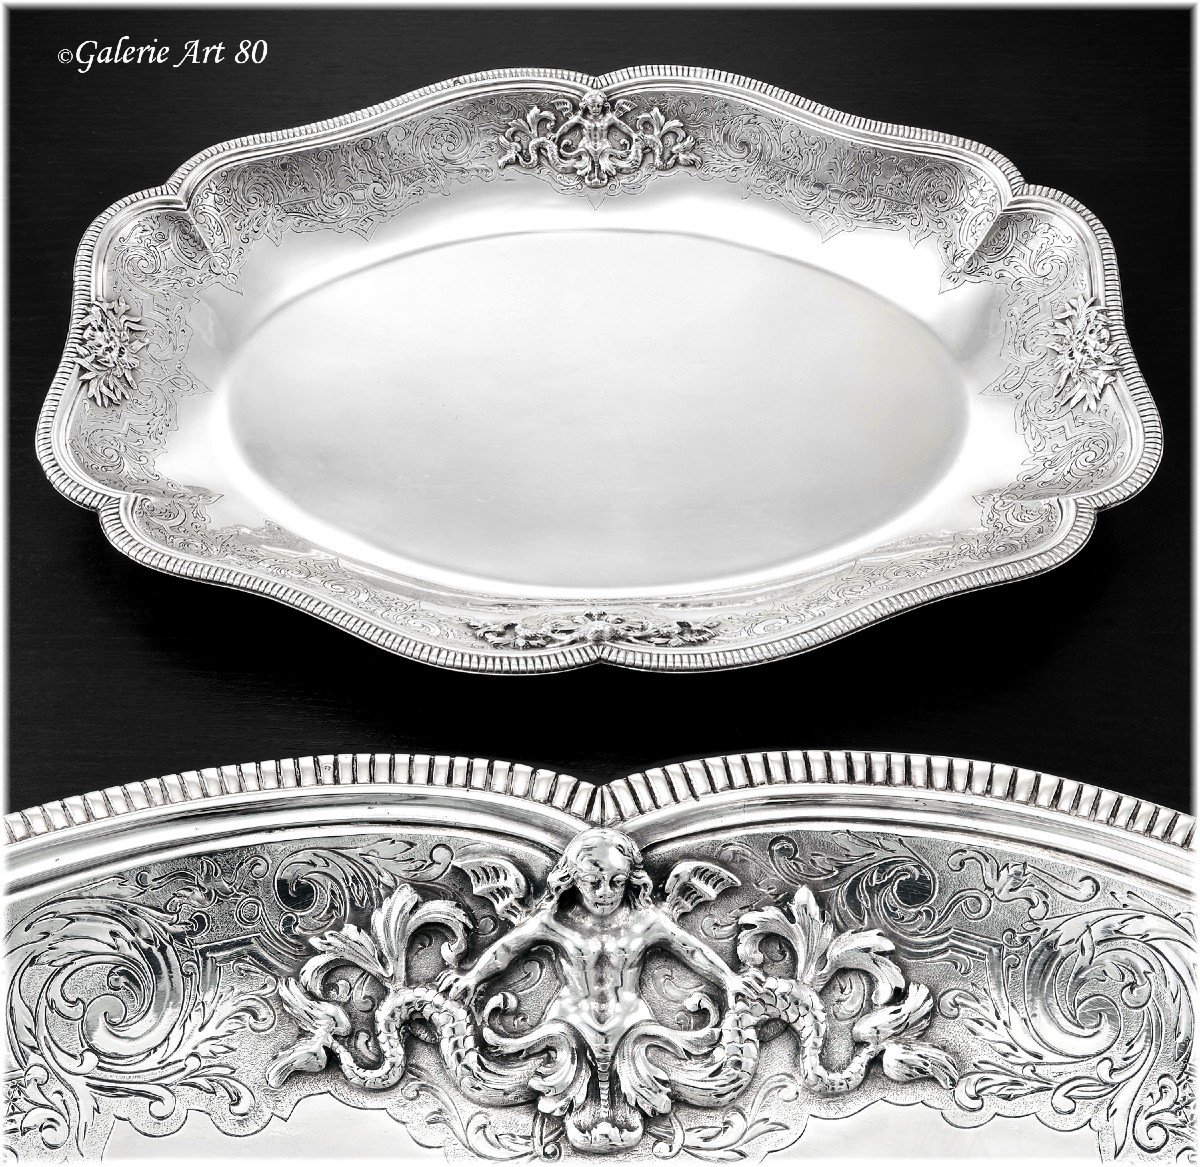 Tiffany :  Antique Sterling Silver Regency Style Centerpiece - Hollow Dish Fauns & Melusina Decor-photo-1